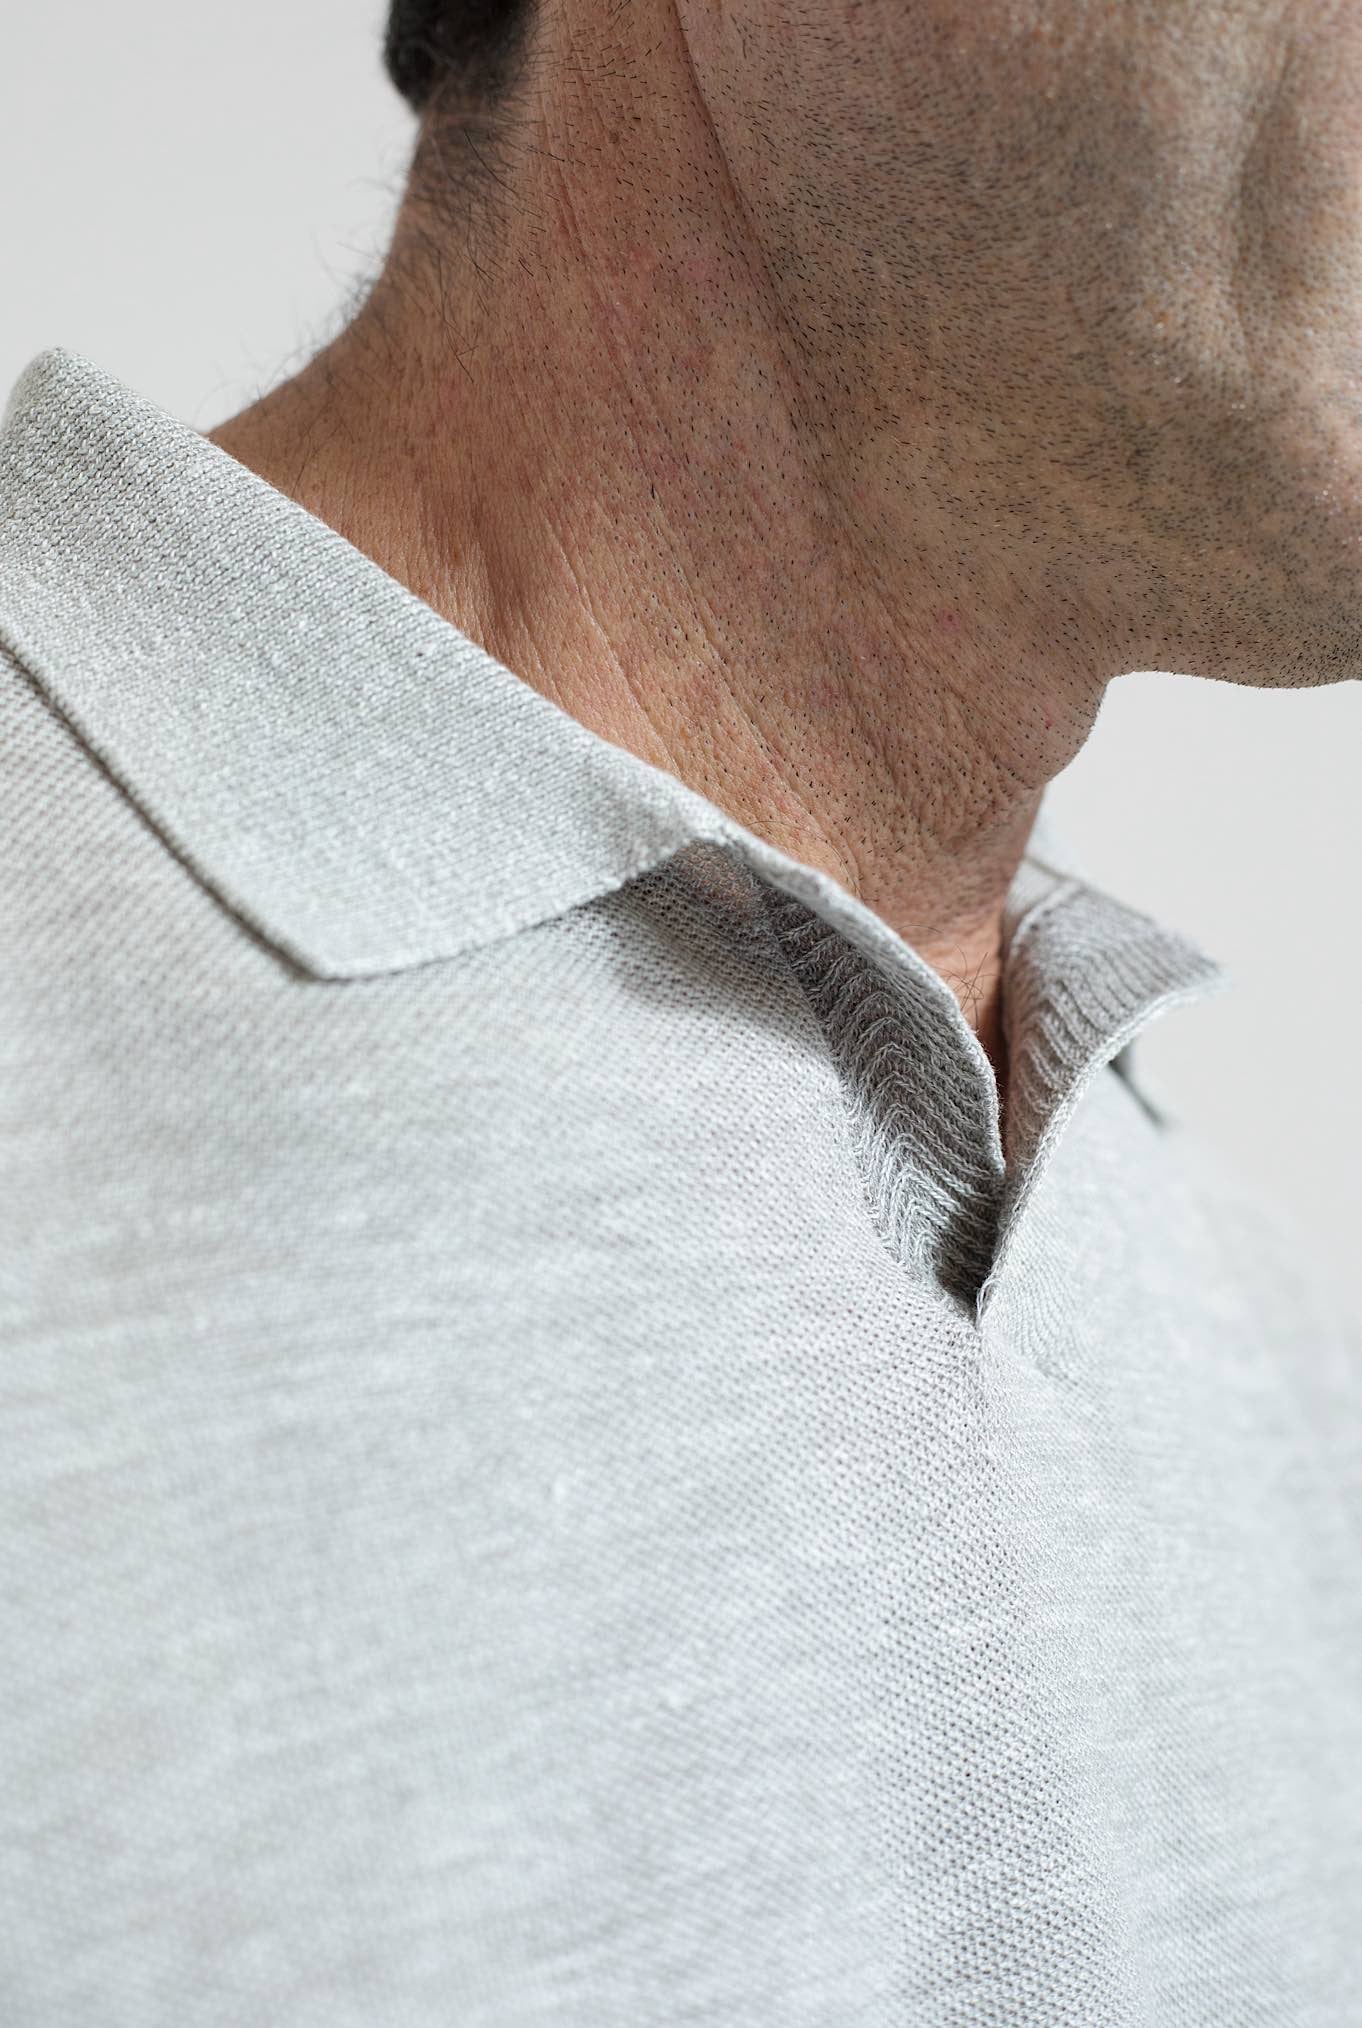 SEASE MM Polo Shirt in Pearl Gray Cotton and Linen